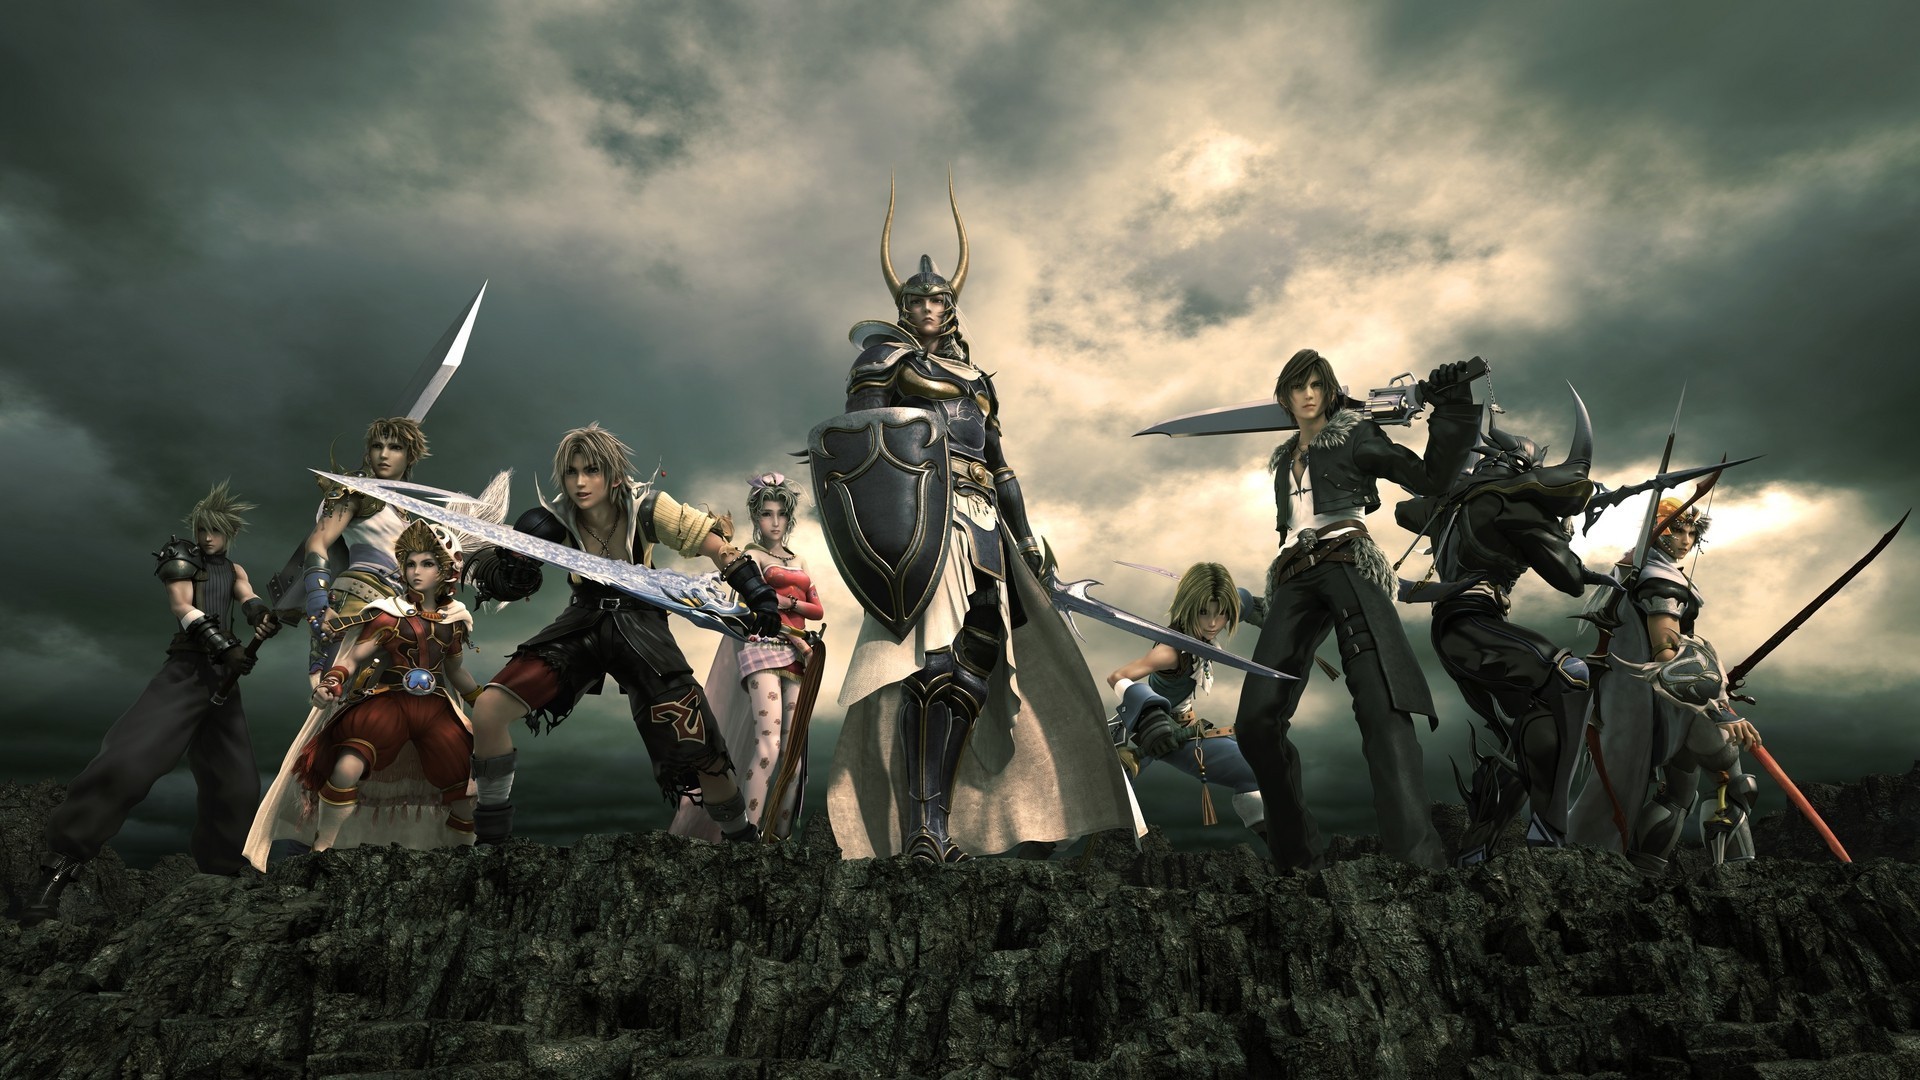 1920x1080 Wallpaper Final Fantasy Collection For Free Download